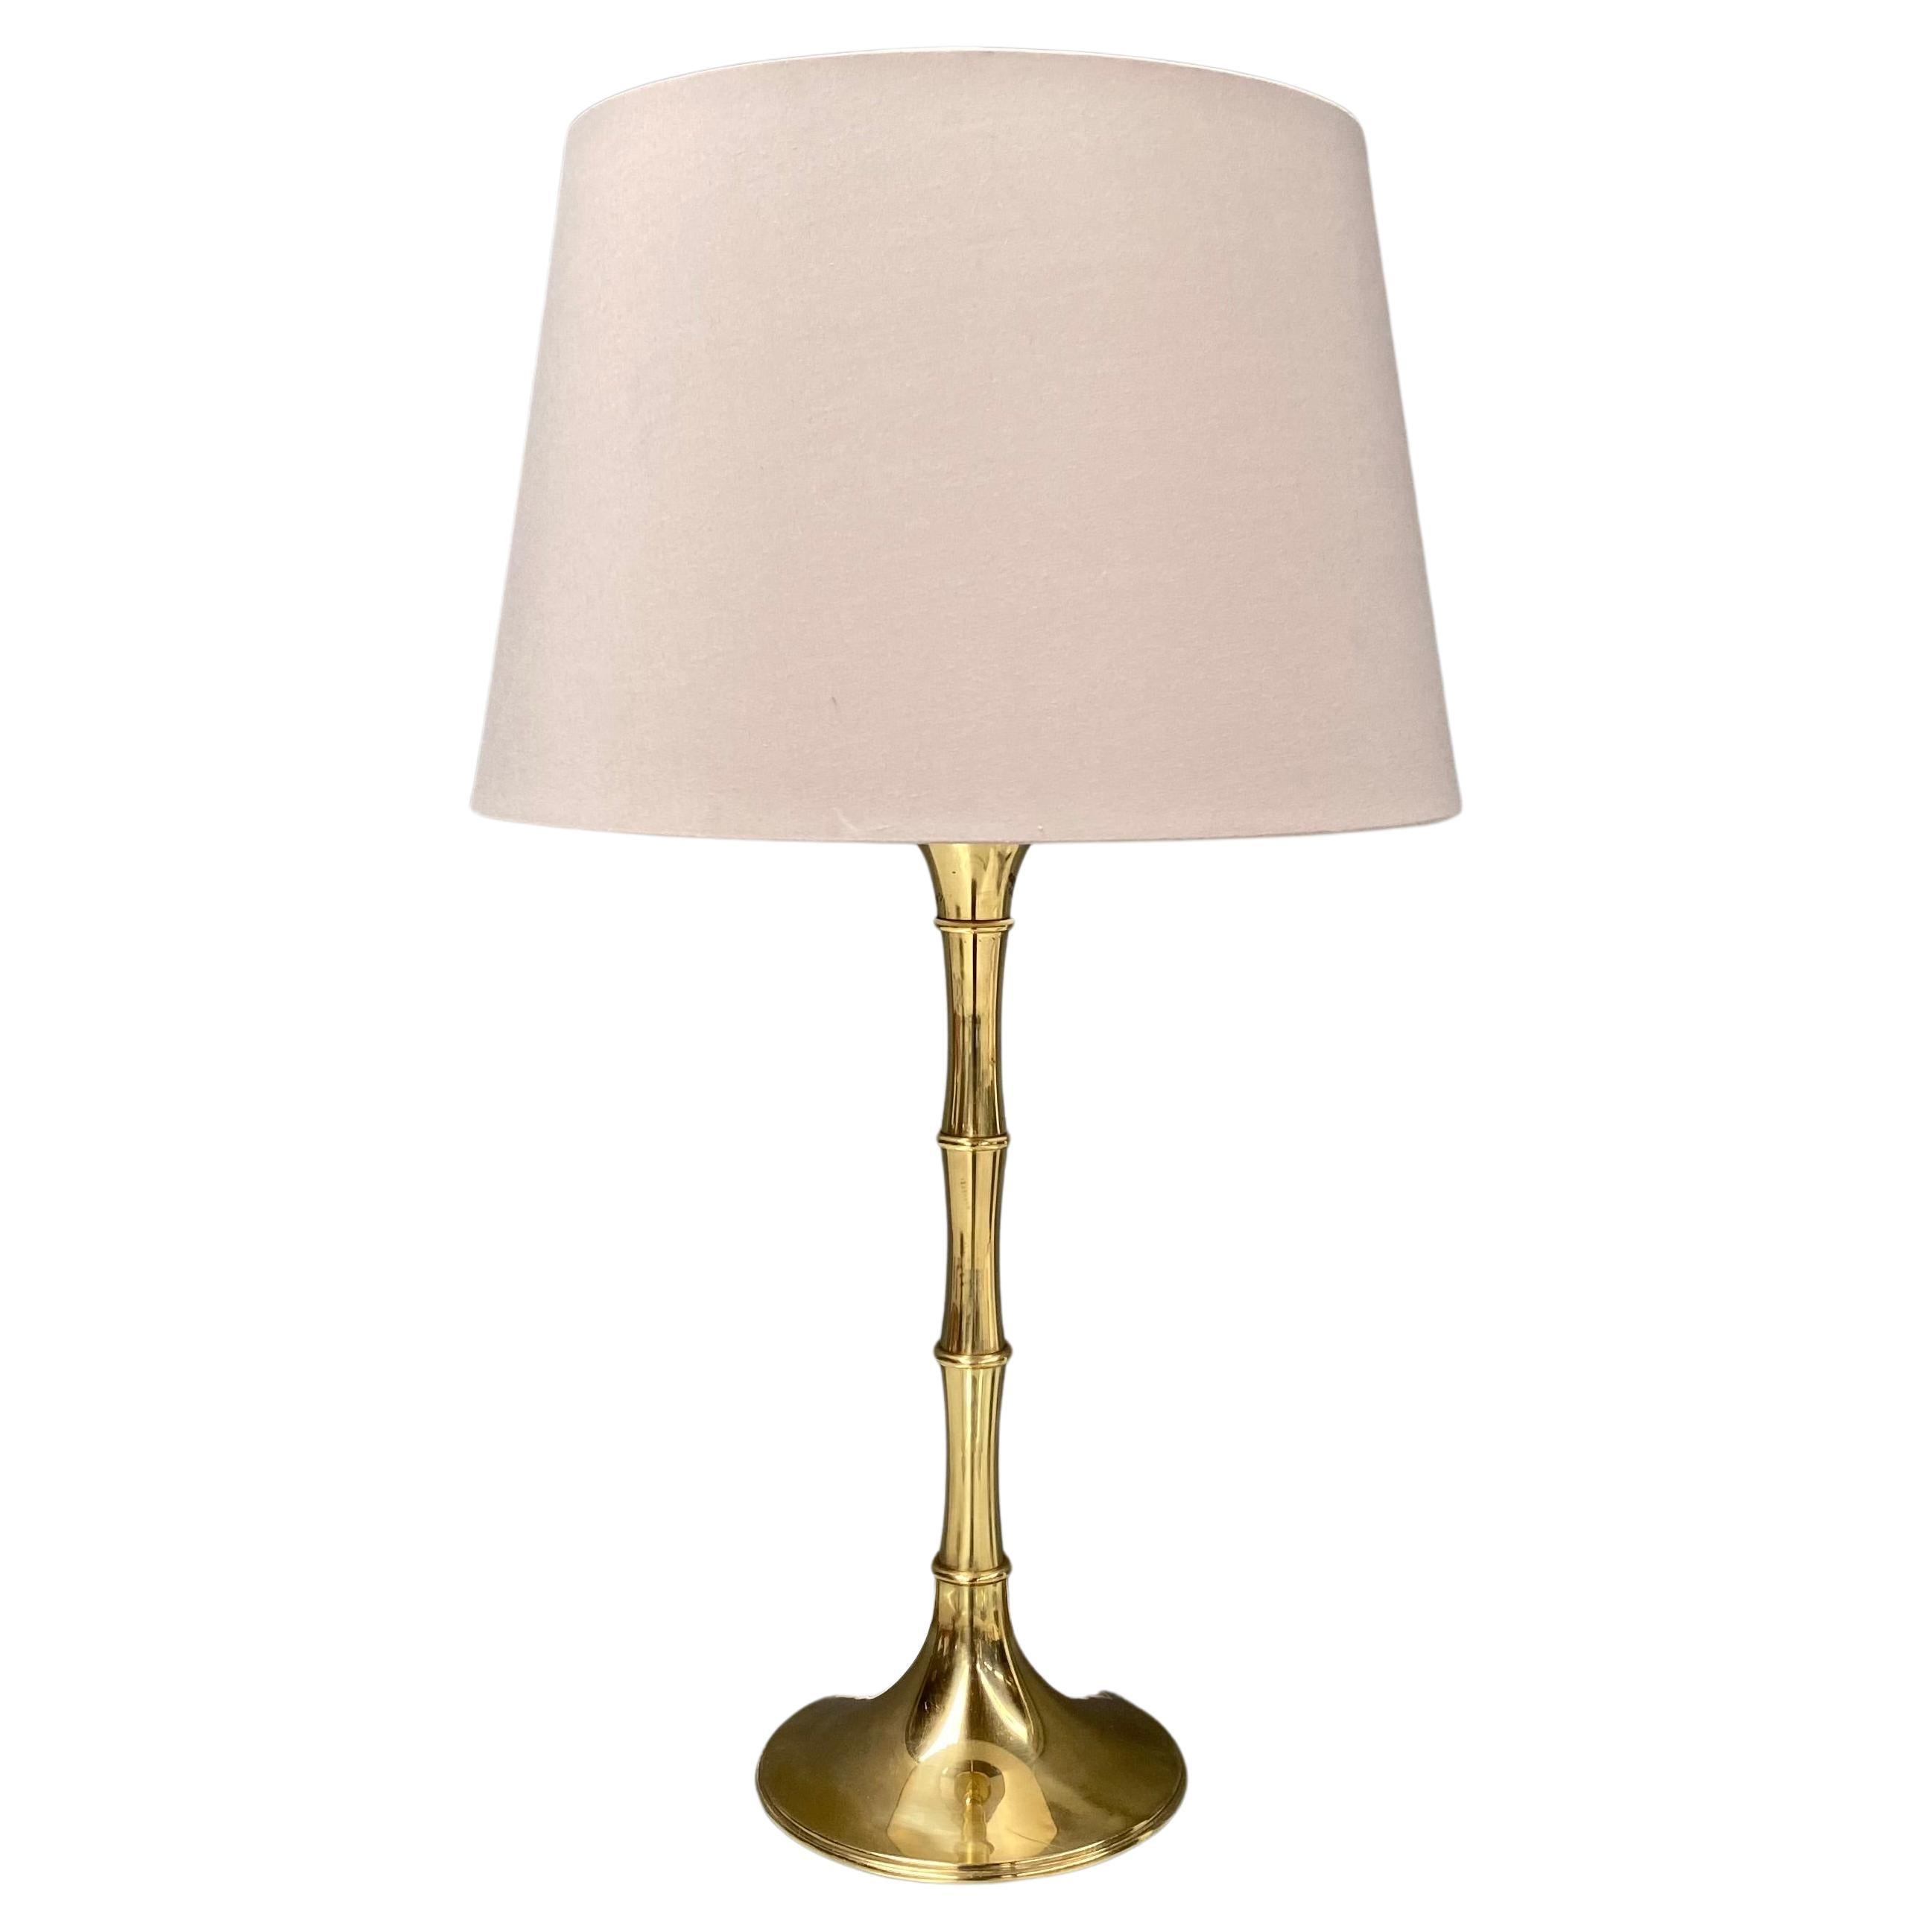 Vintage Bamboo Table Lamp in Brass by Ingo Maurer for M Design, 1960s.